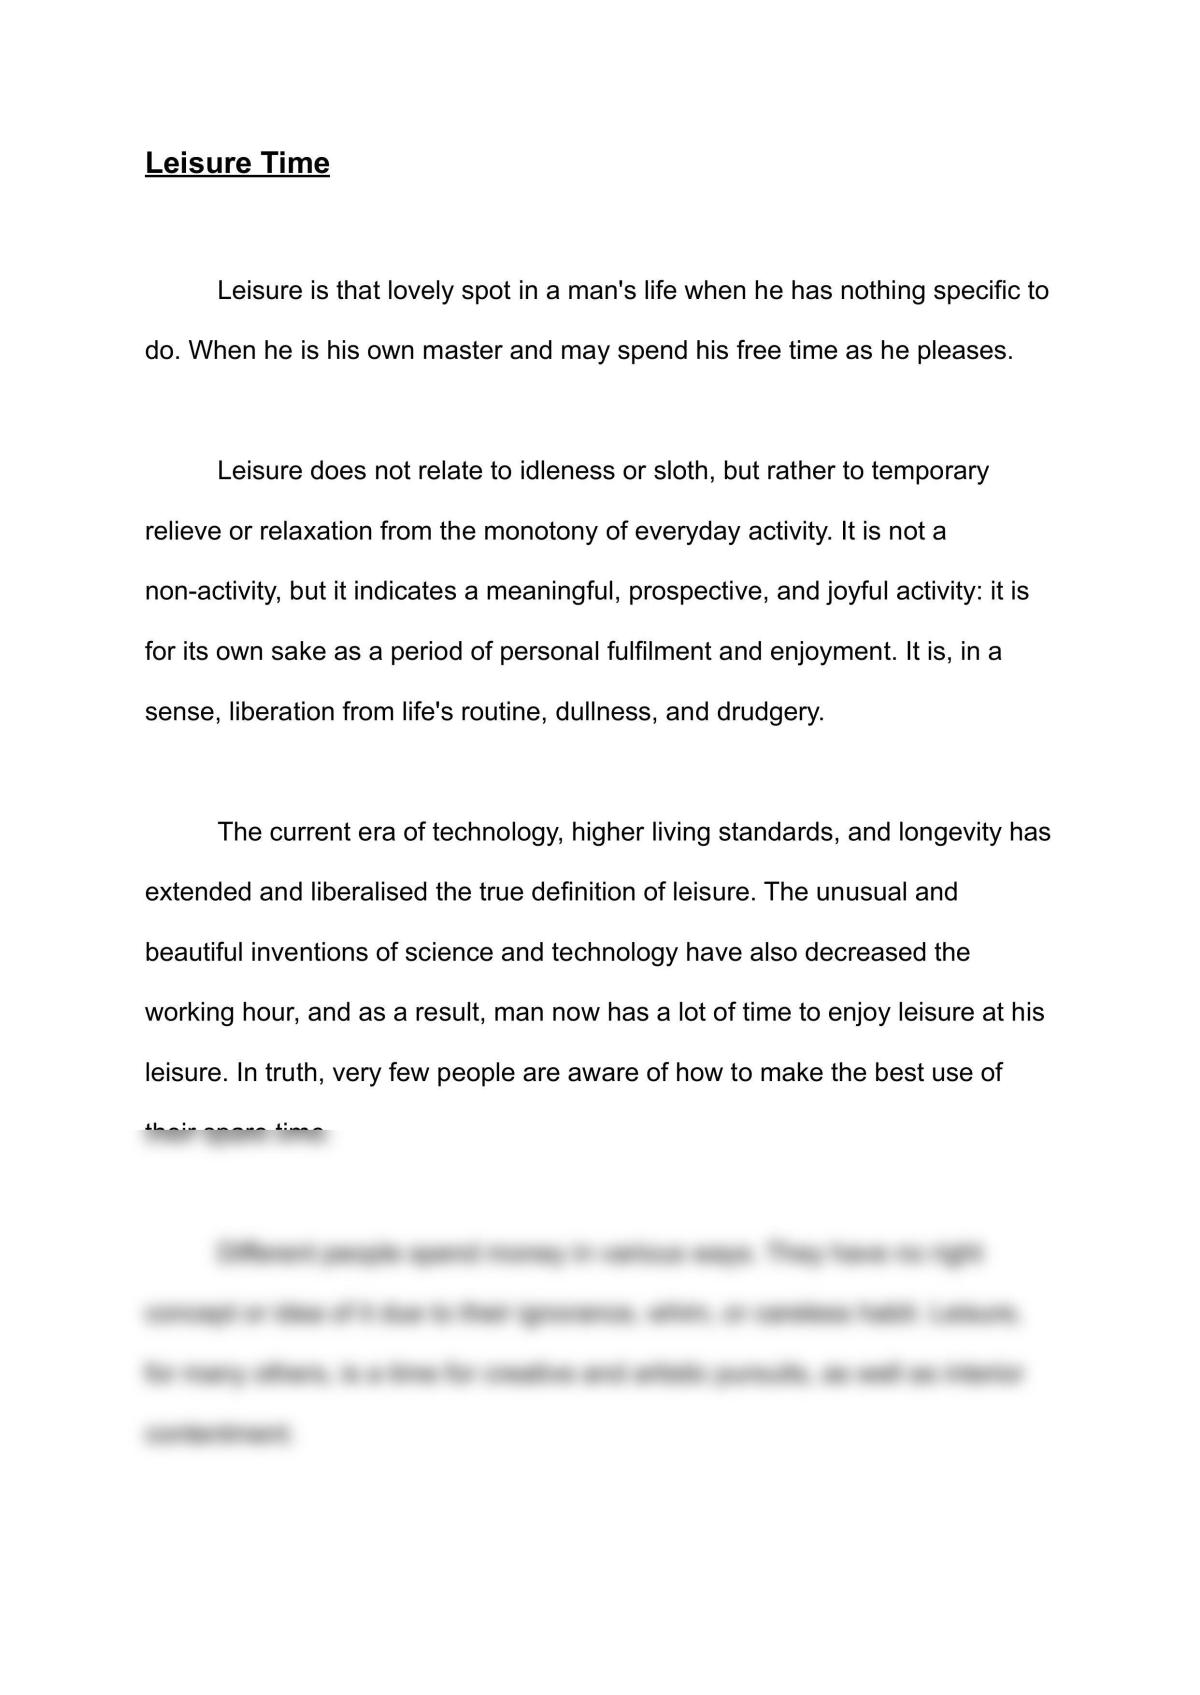 my leisure time essay for students